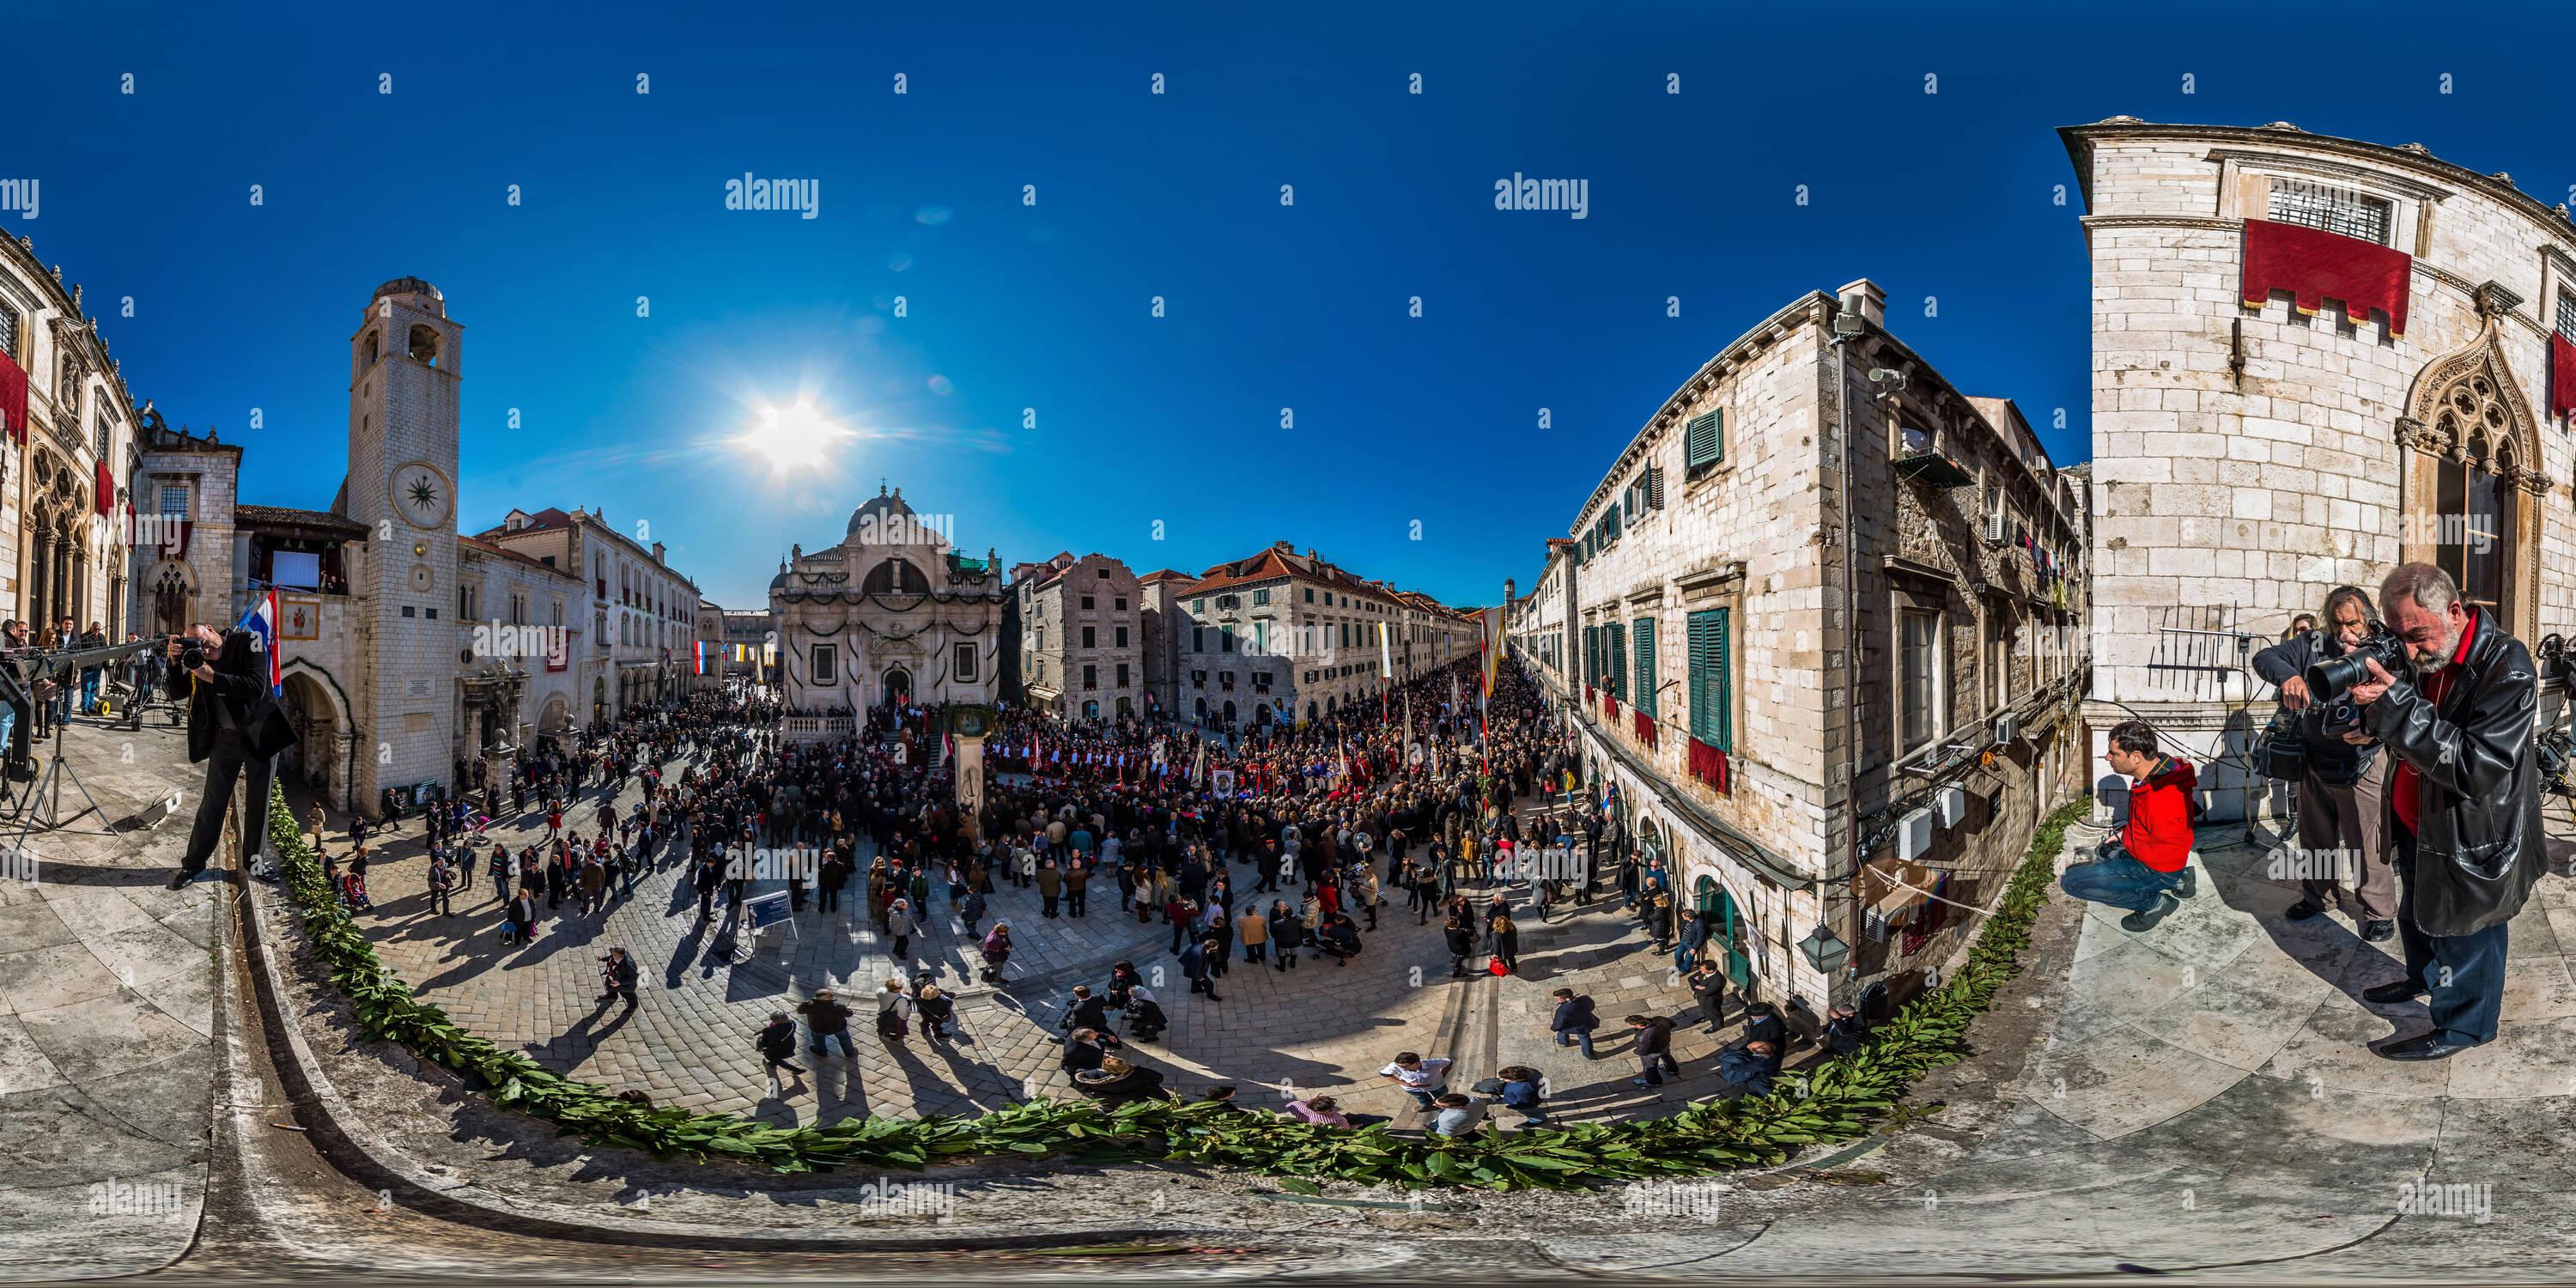 360 degree panoramic view of Saint Blaise Procession 2014. from Sponza Palace